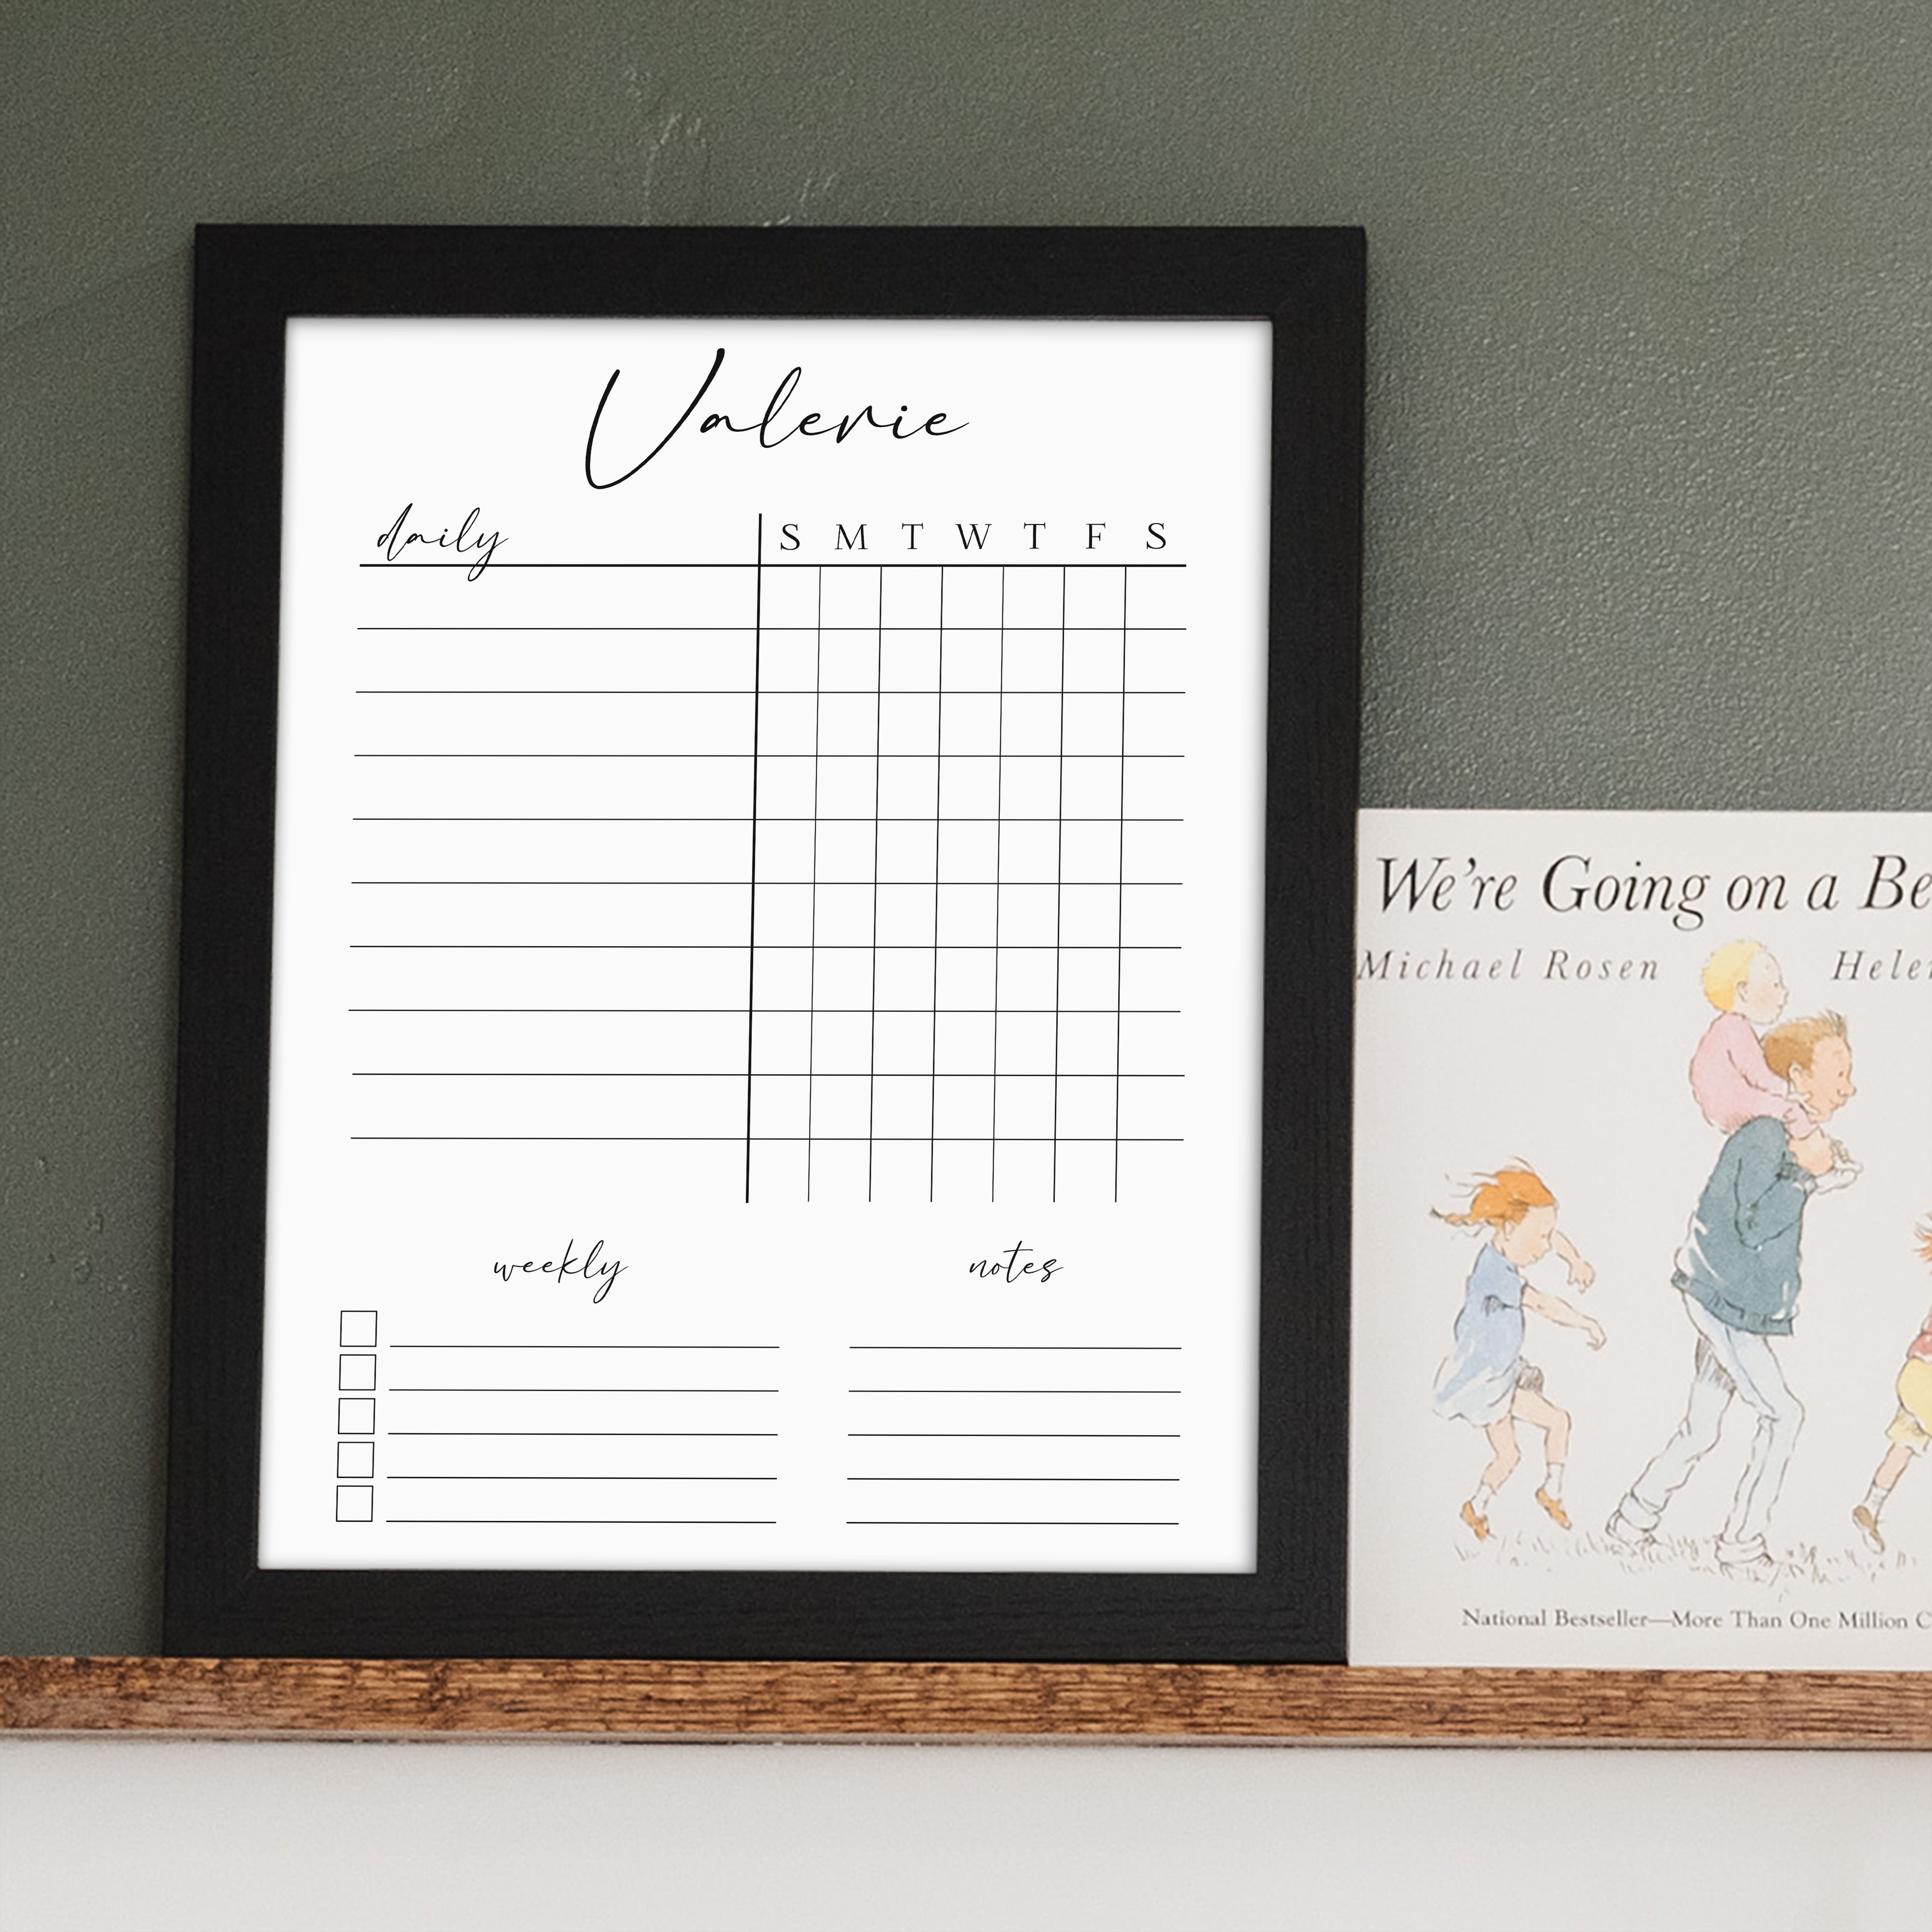 A framed whiteboard chore chart hanging on the wall